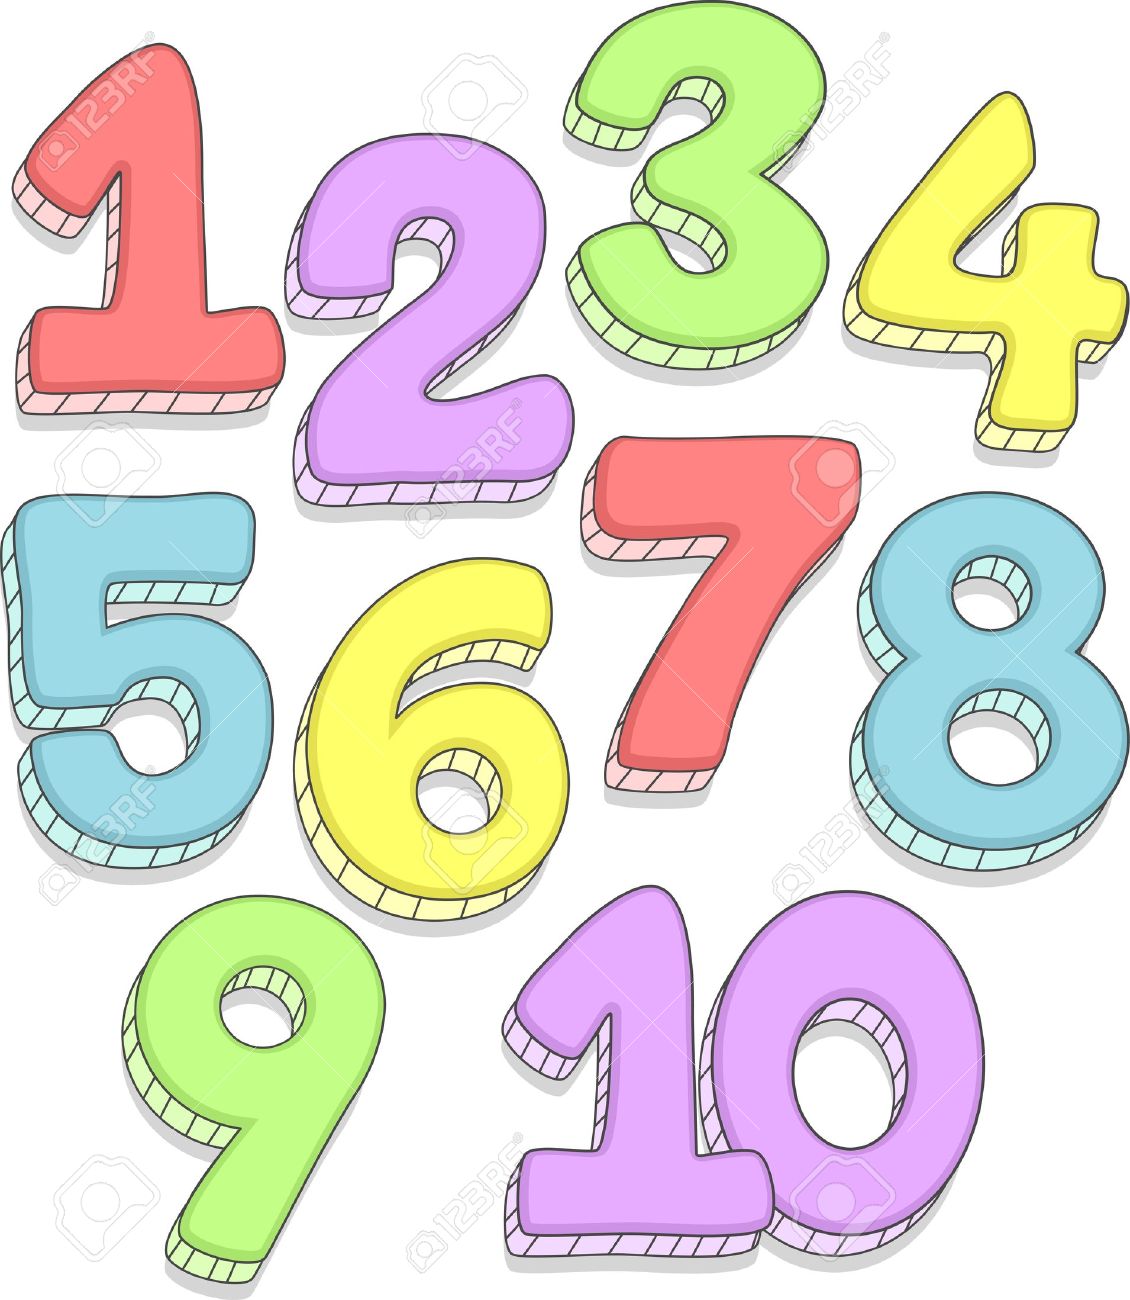 Counting clipart - Clipground